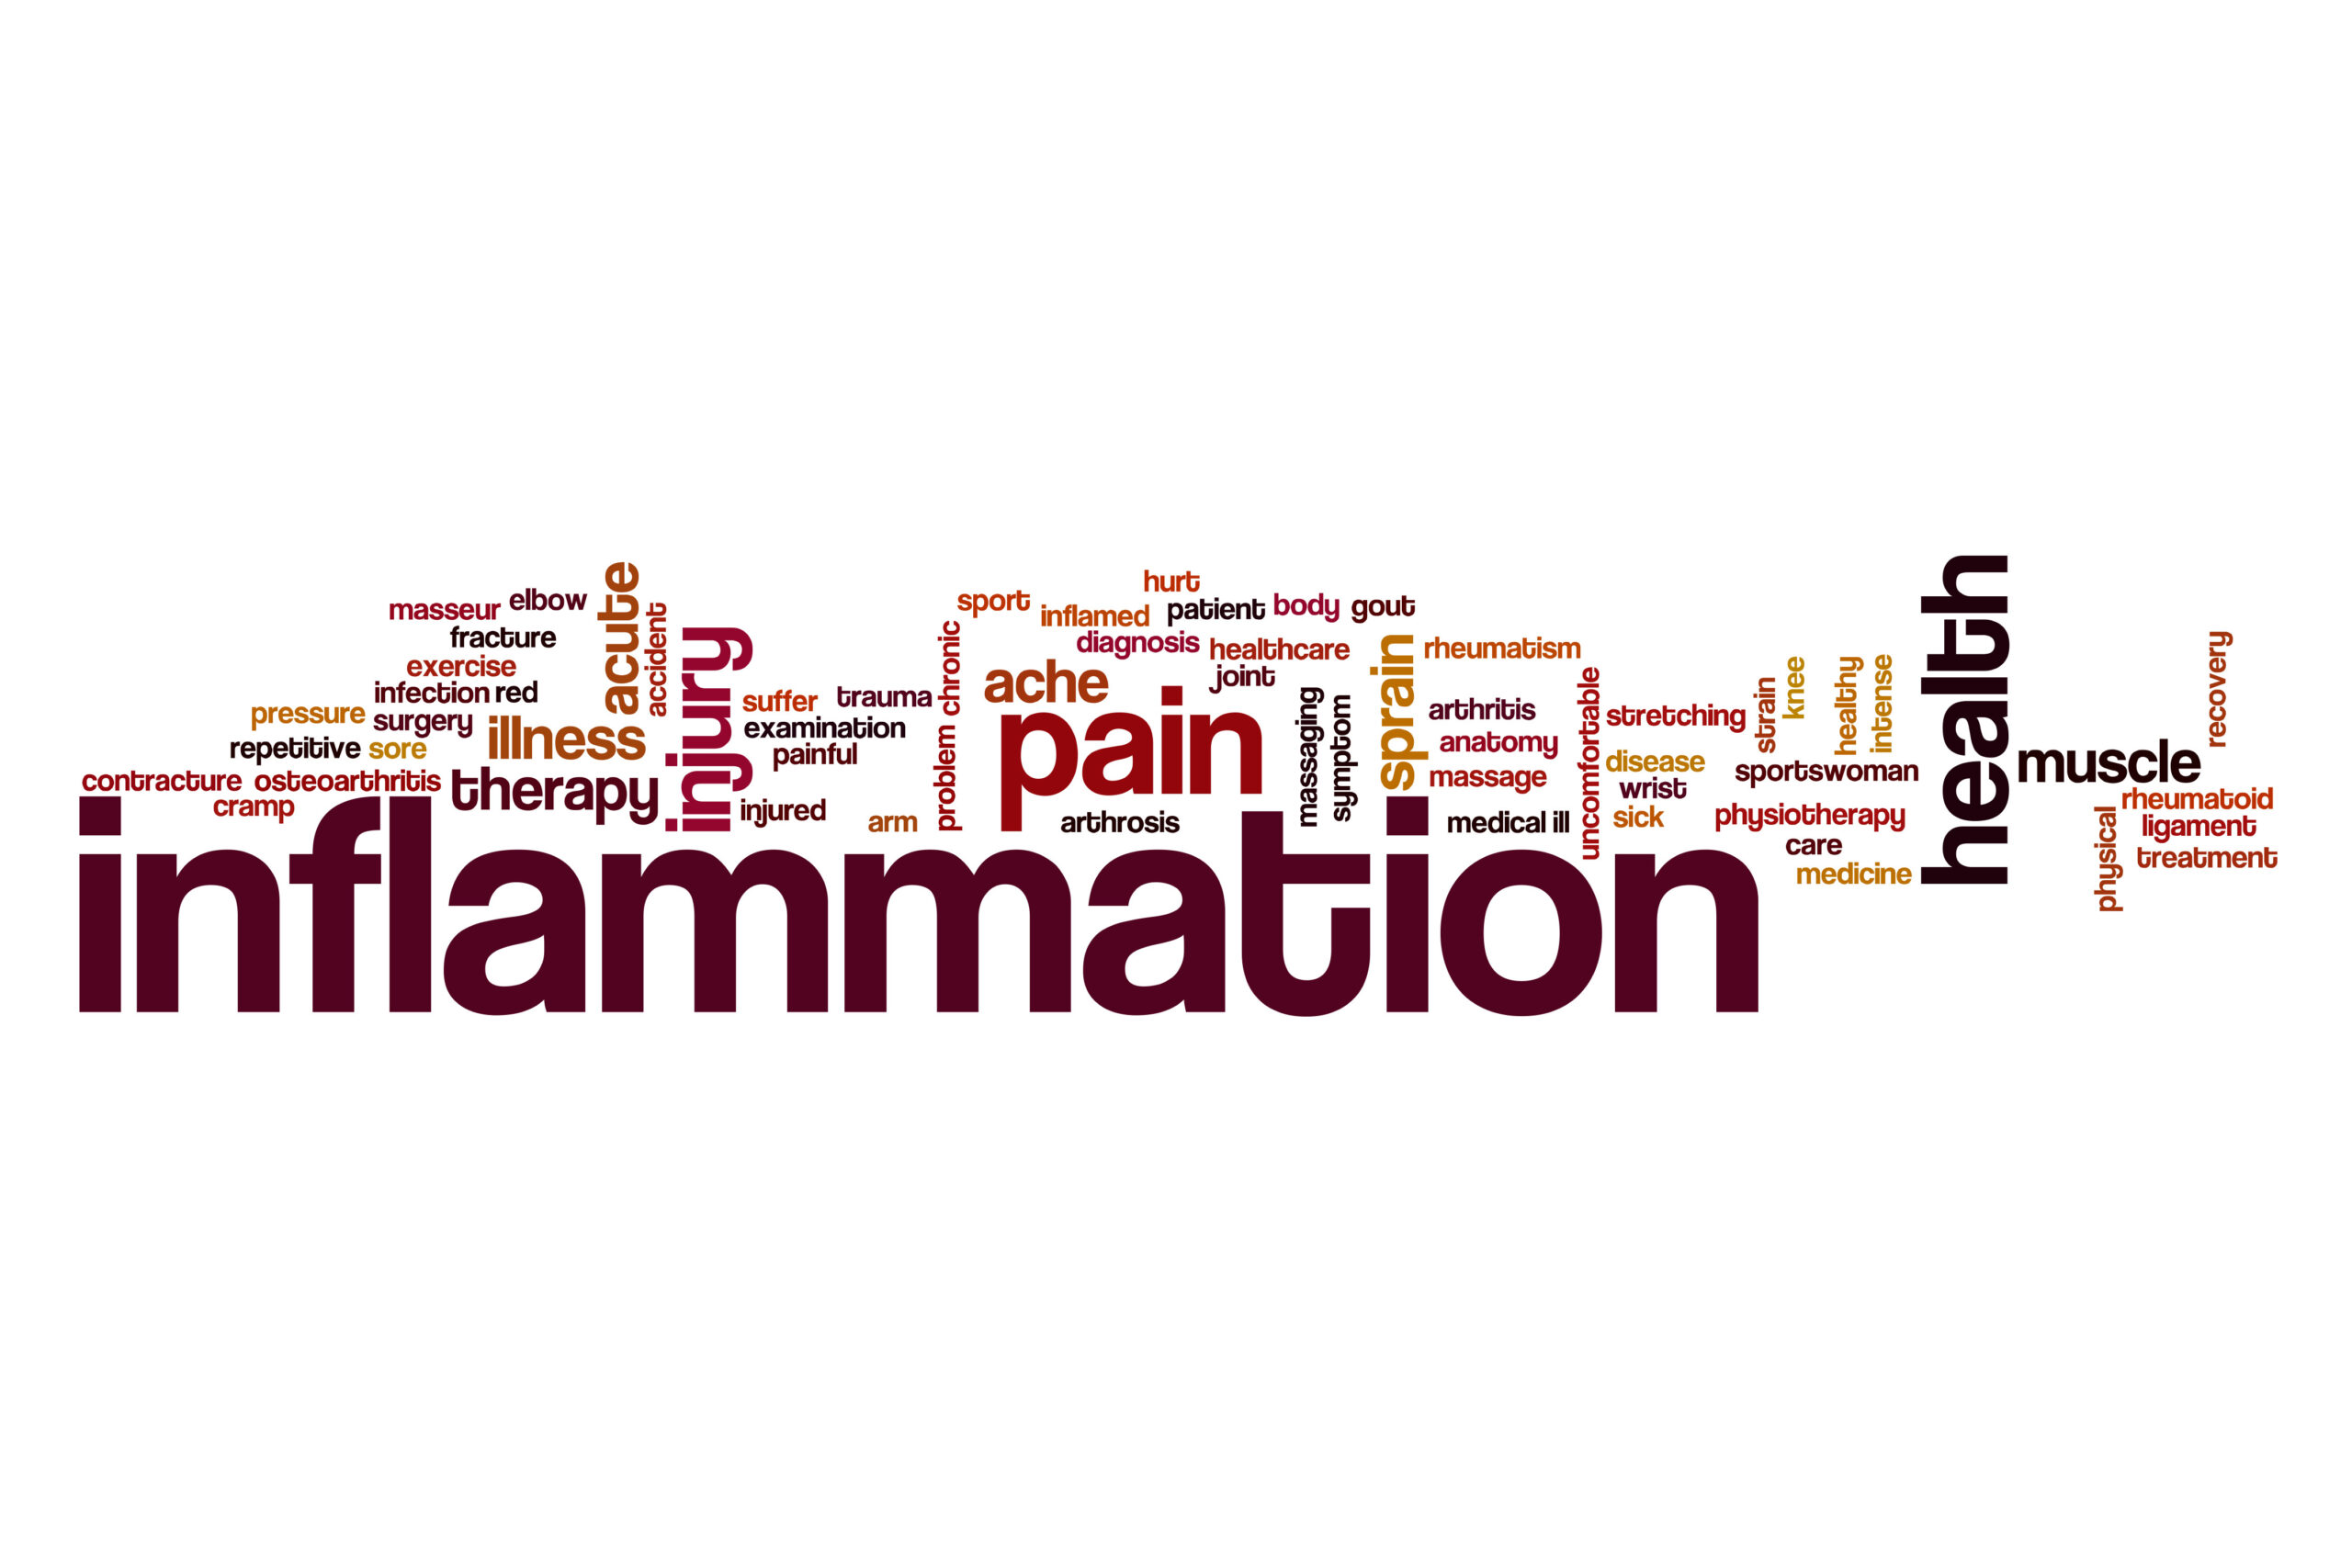 Cells In The Nervous System Can Halt Inflammation